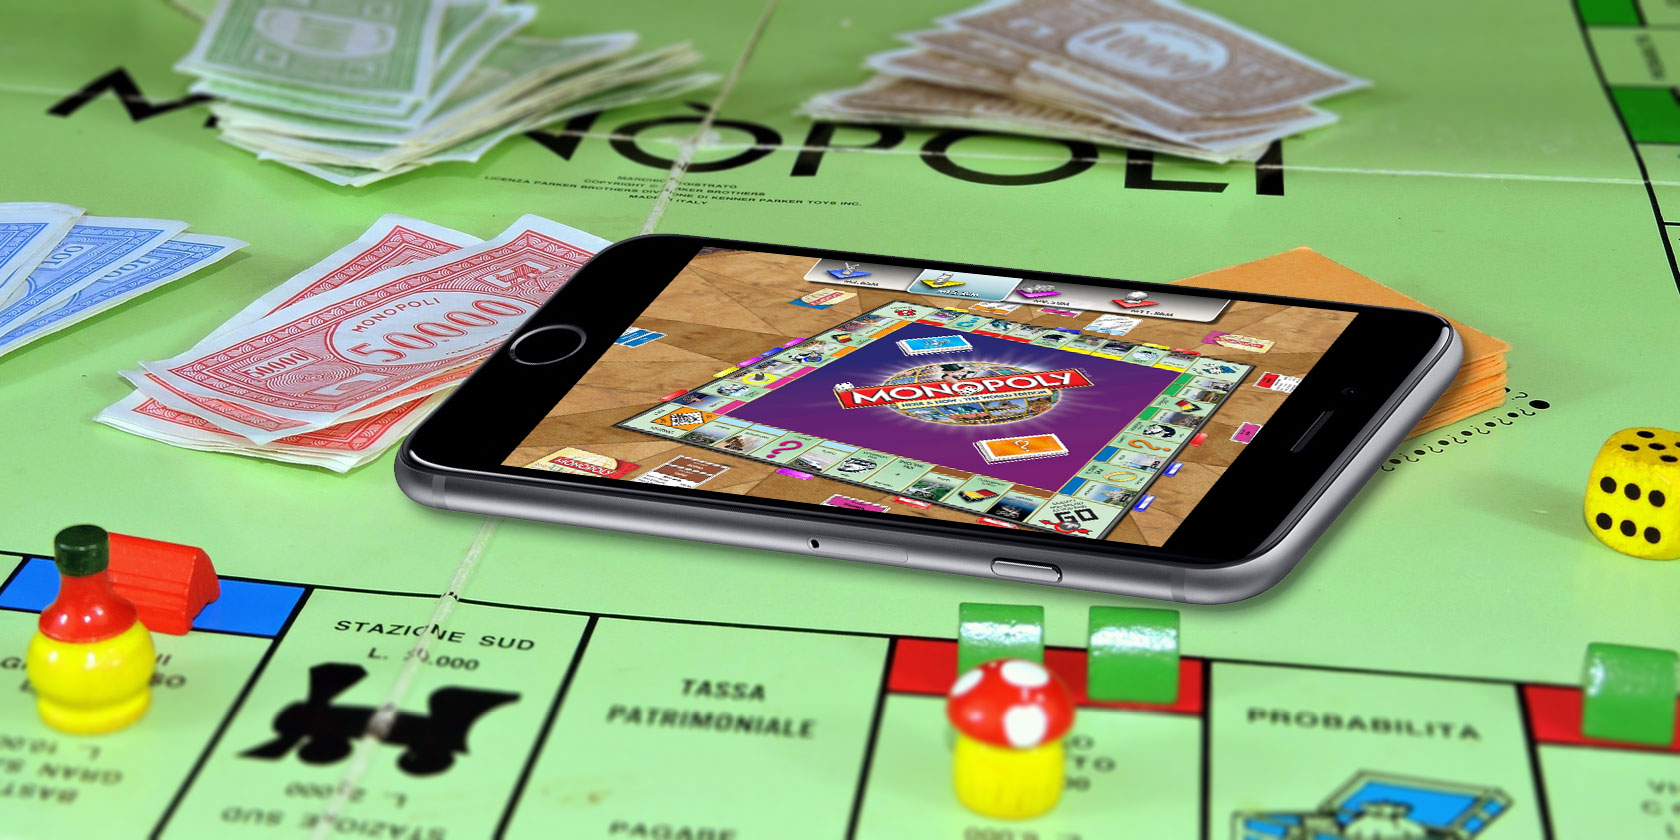 Table games for smartphone and tablet